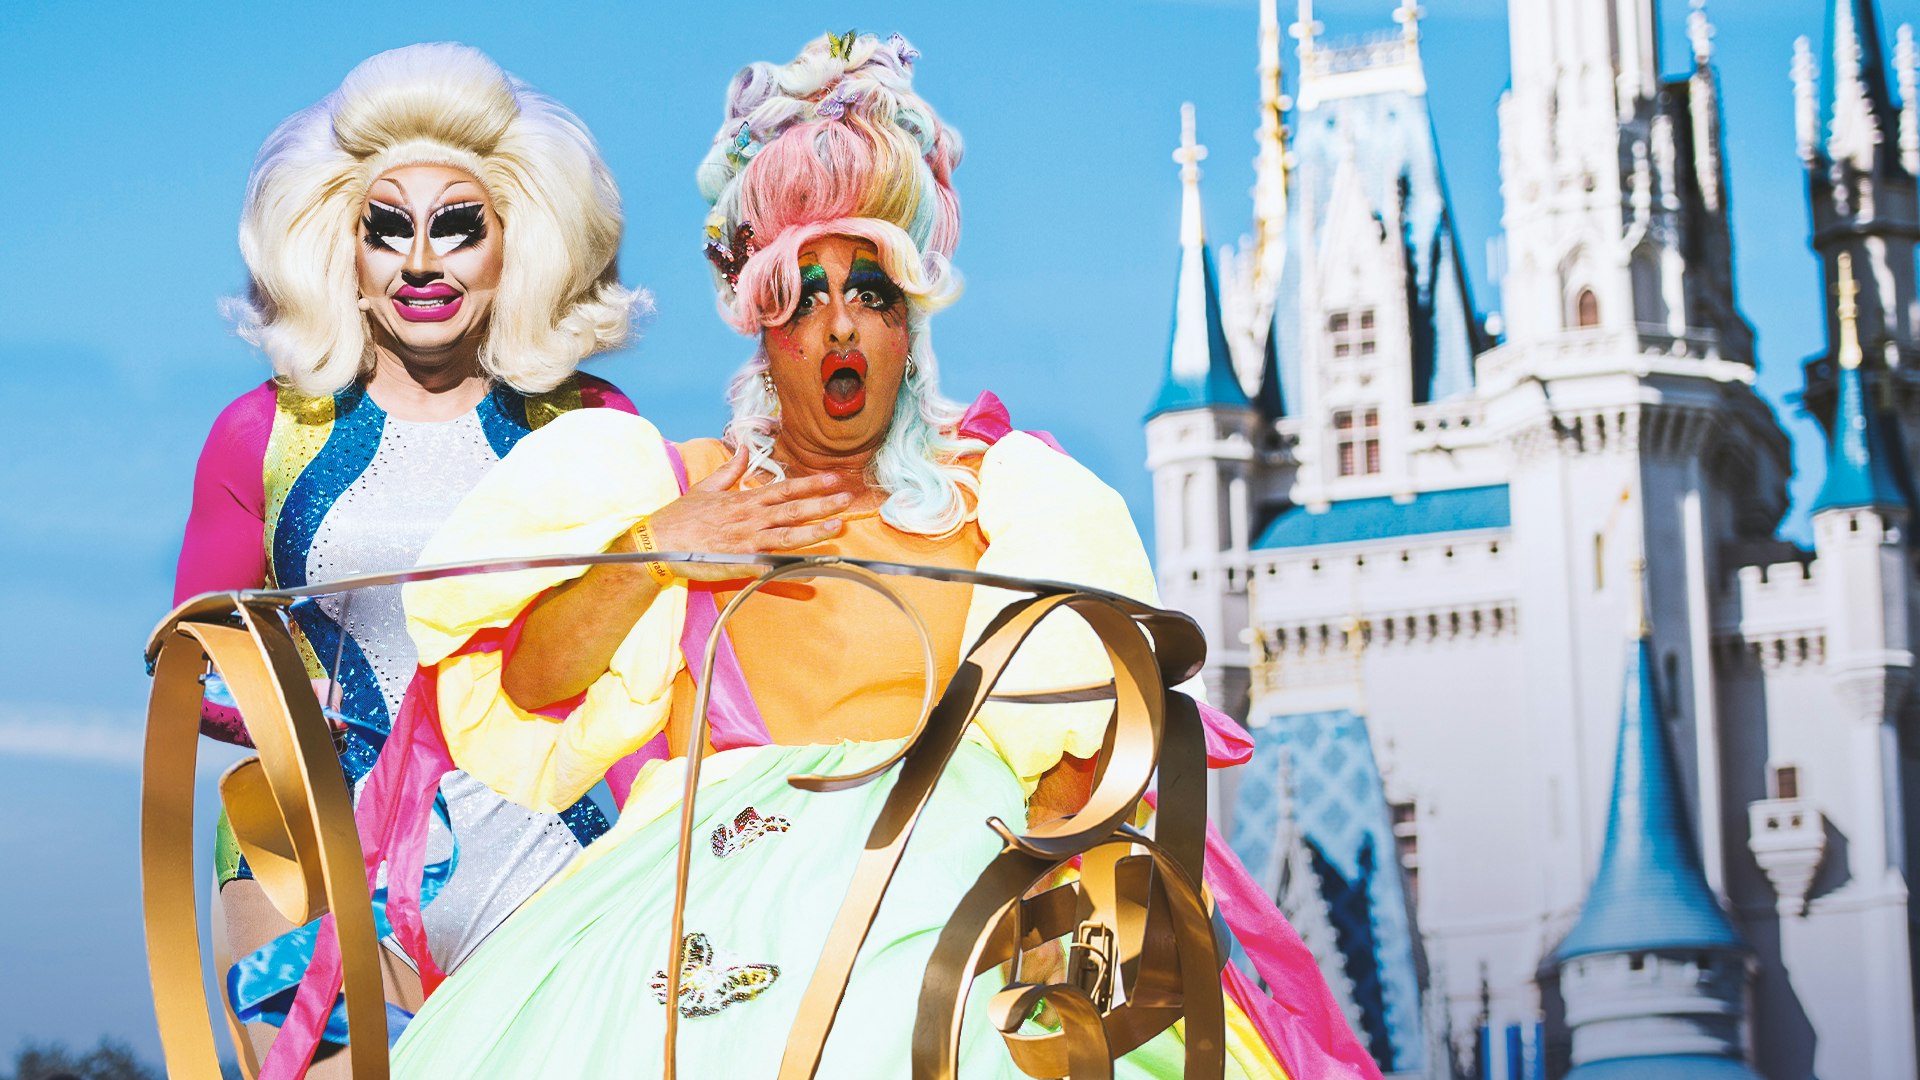 Ep. 937 - Disney Denies Grooming Accusation, But Promoted And Celebrated Child Drag Queens 